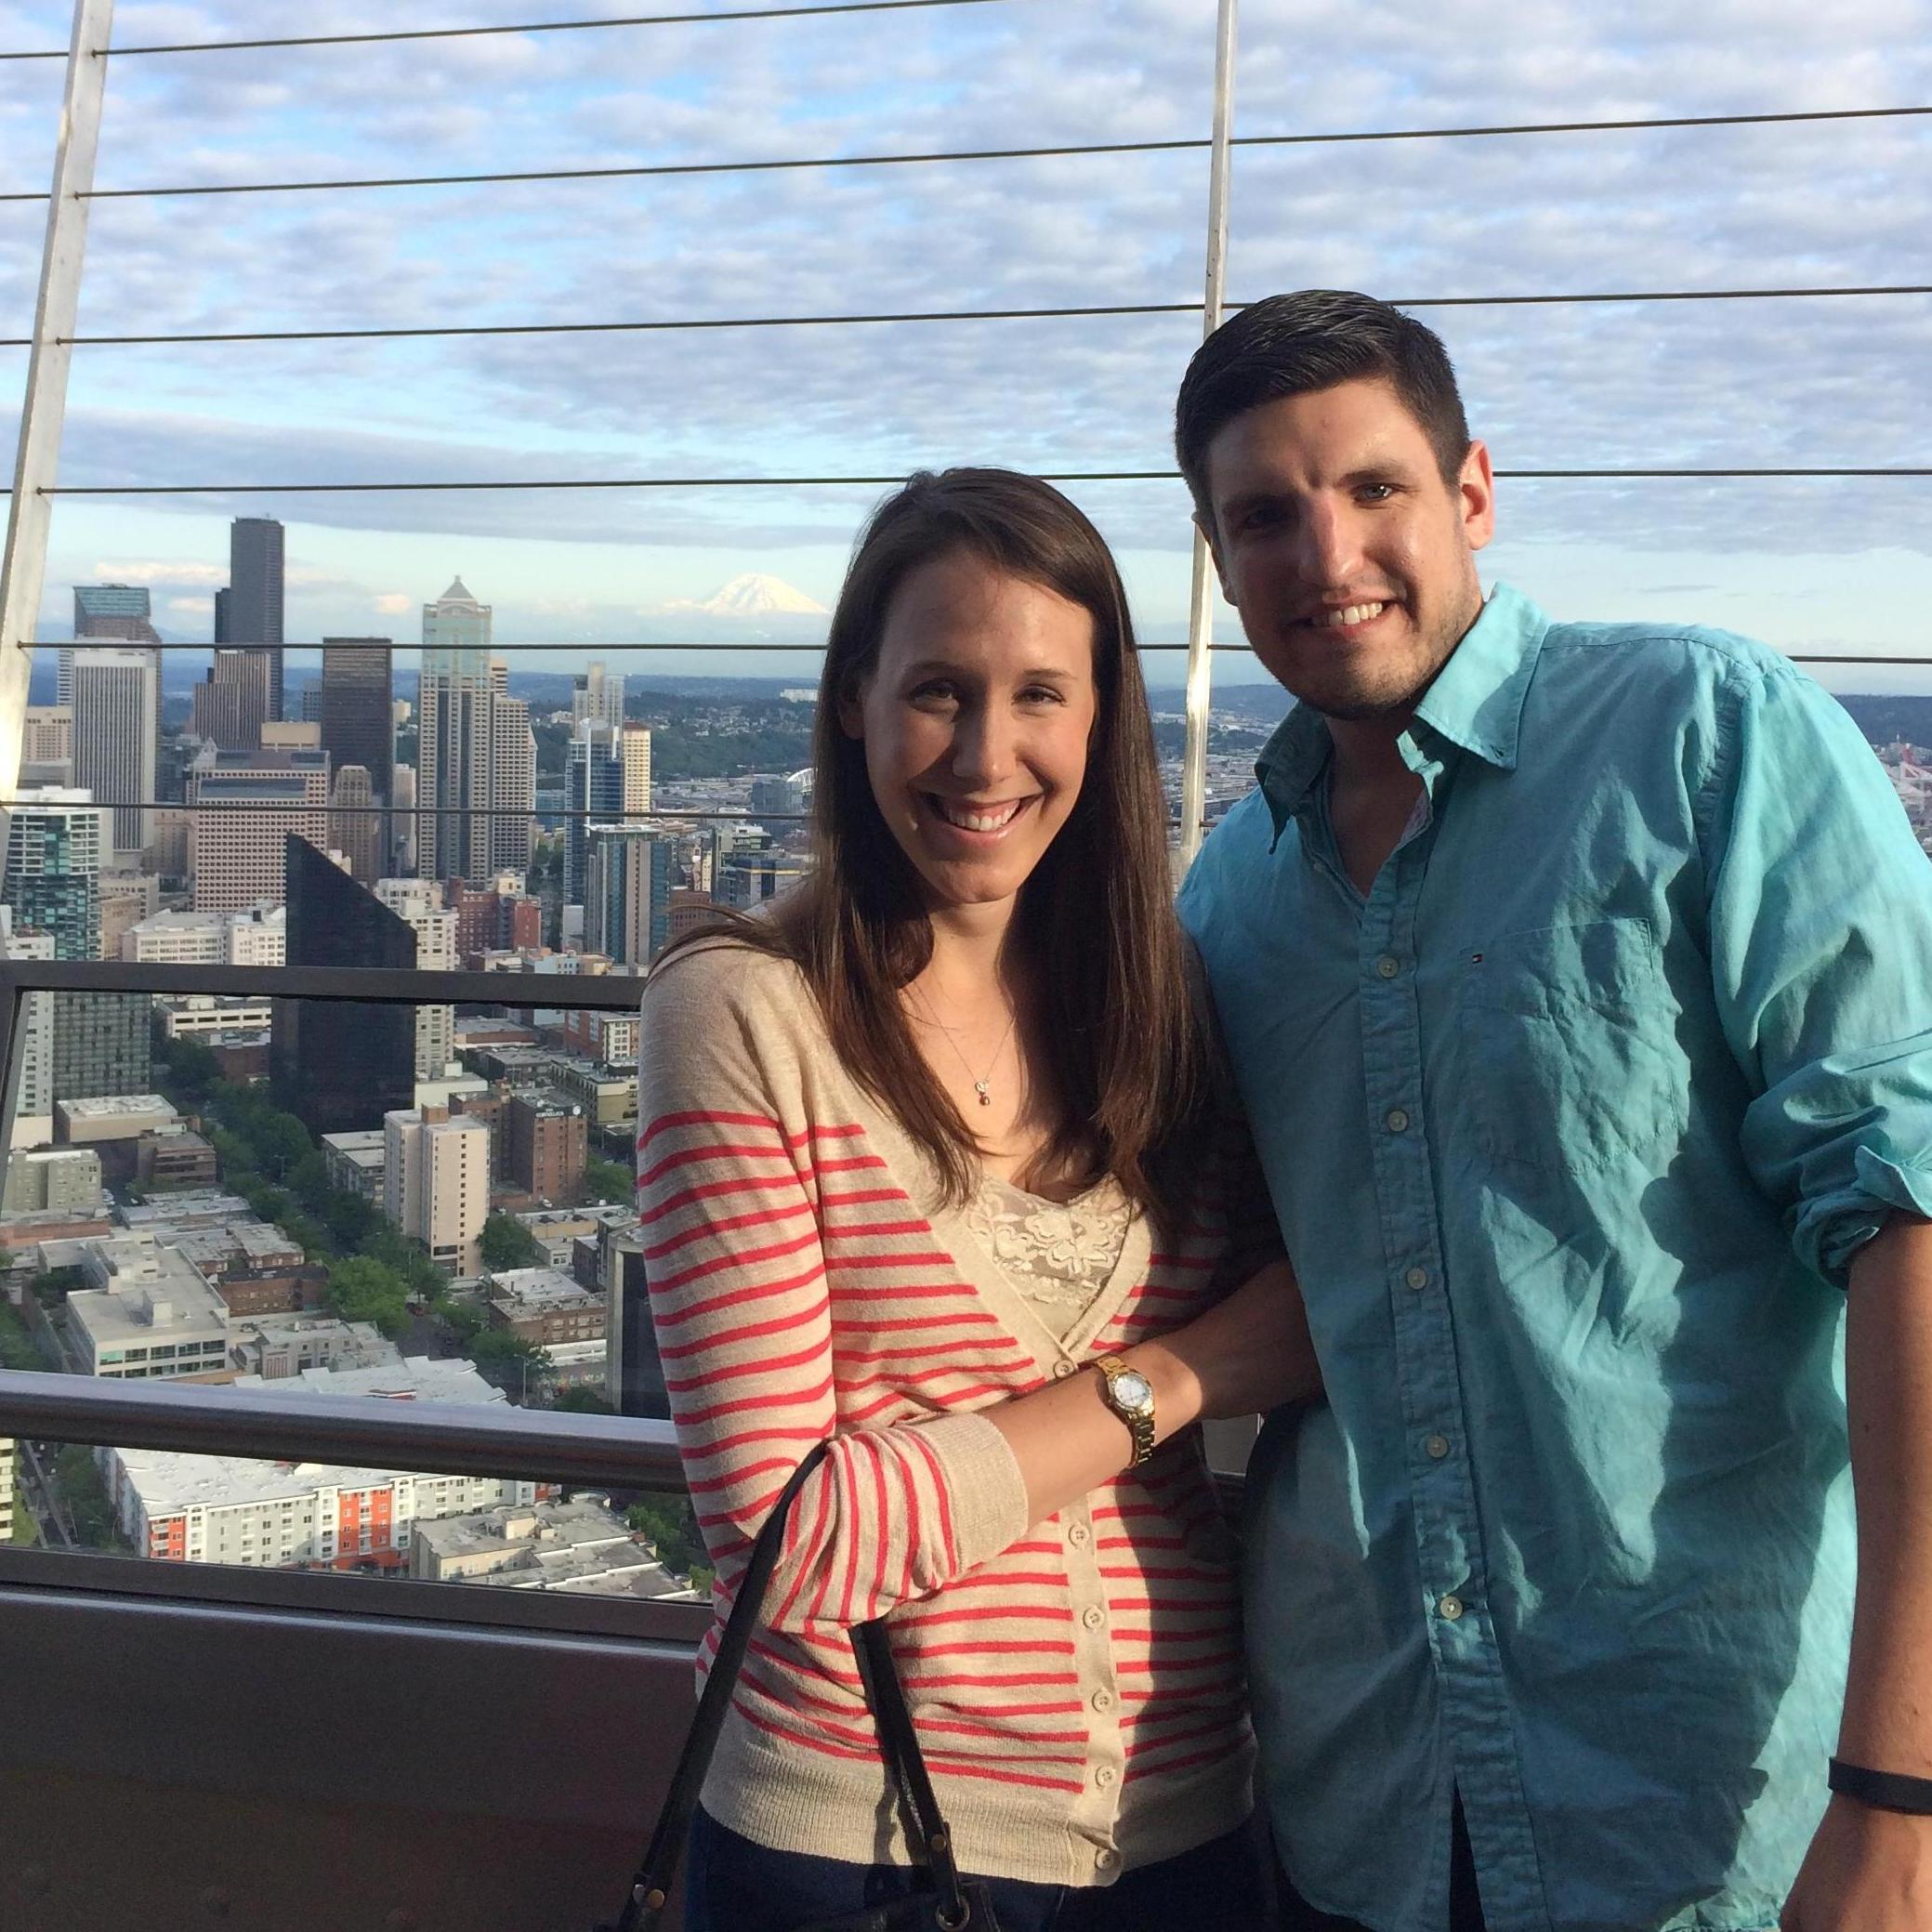 Our first photo together, at the space needle on date #3.